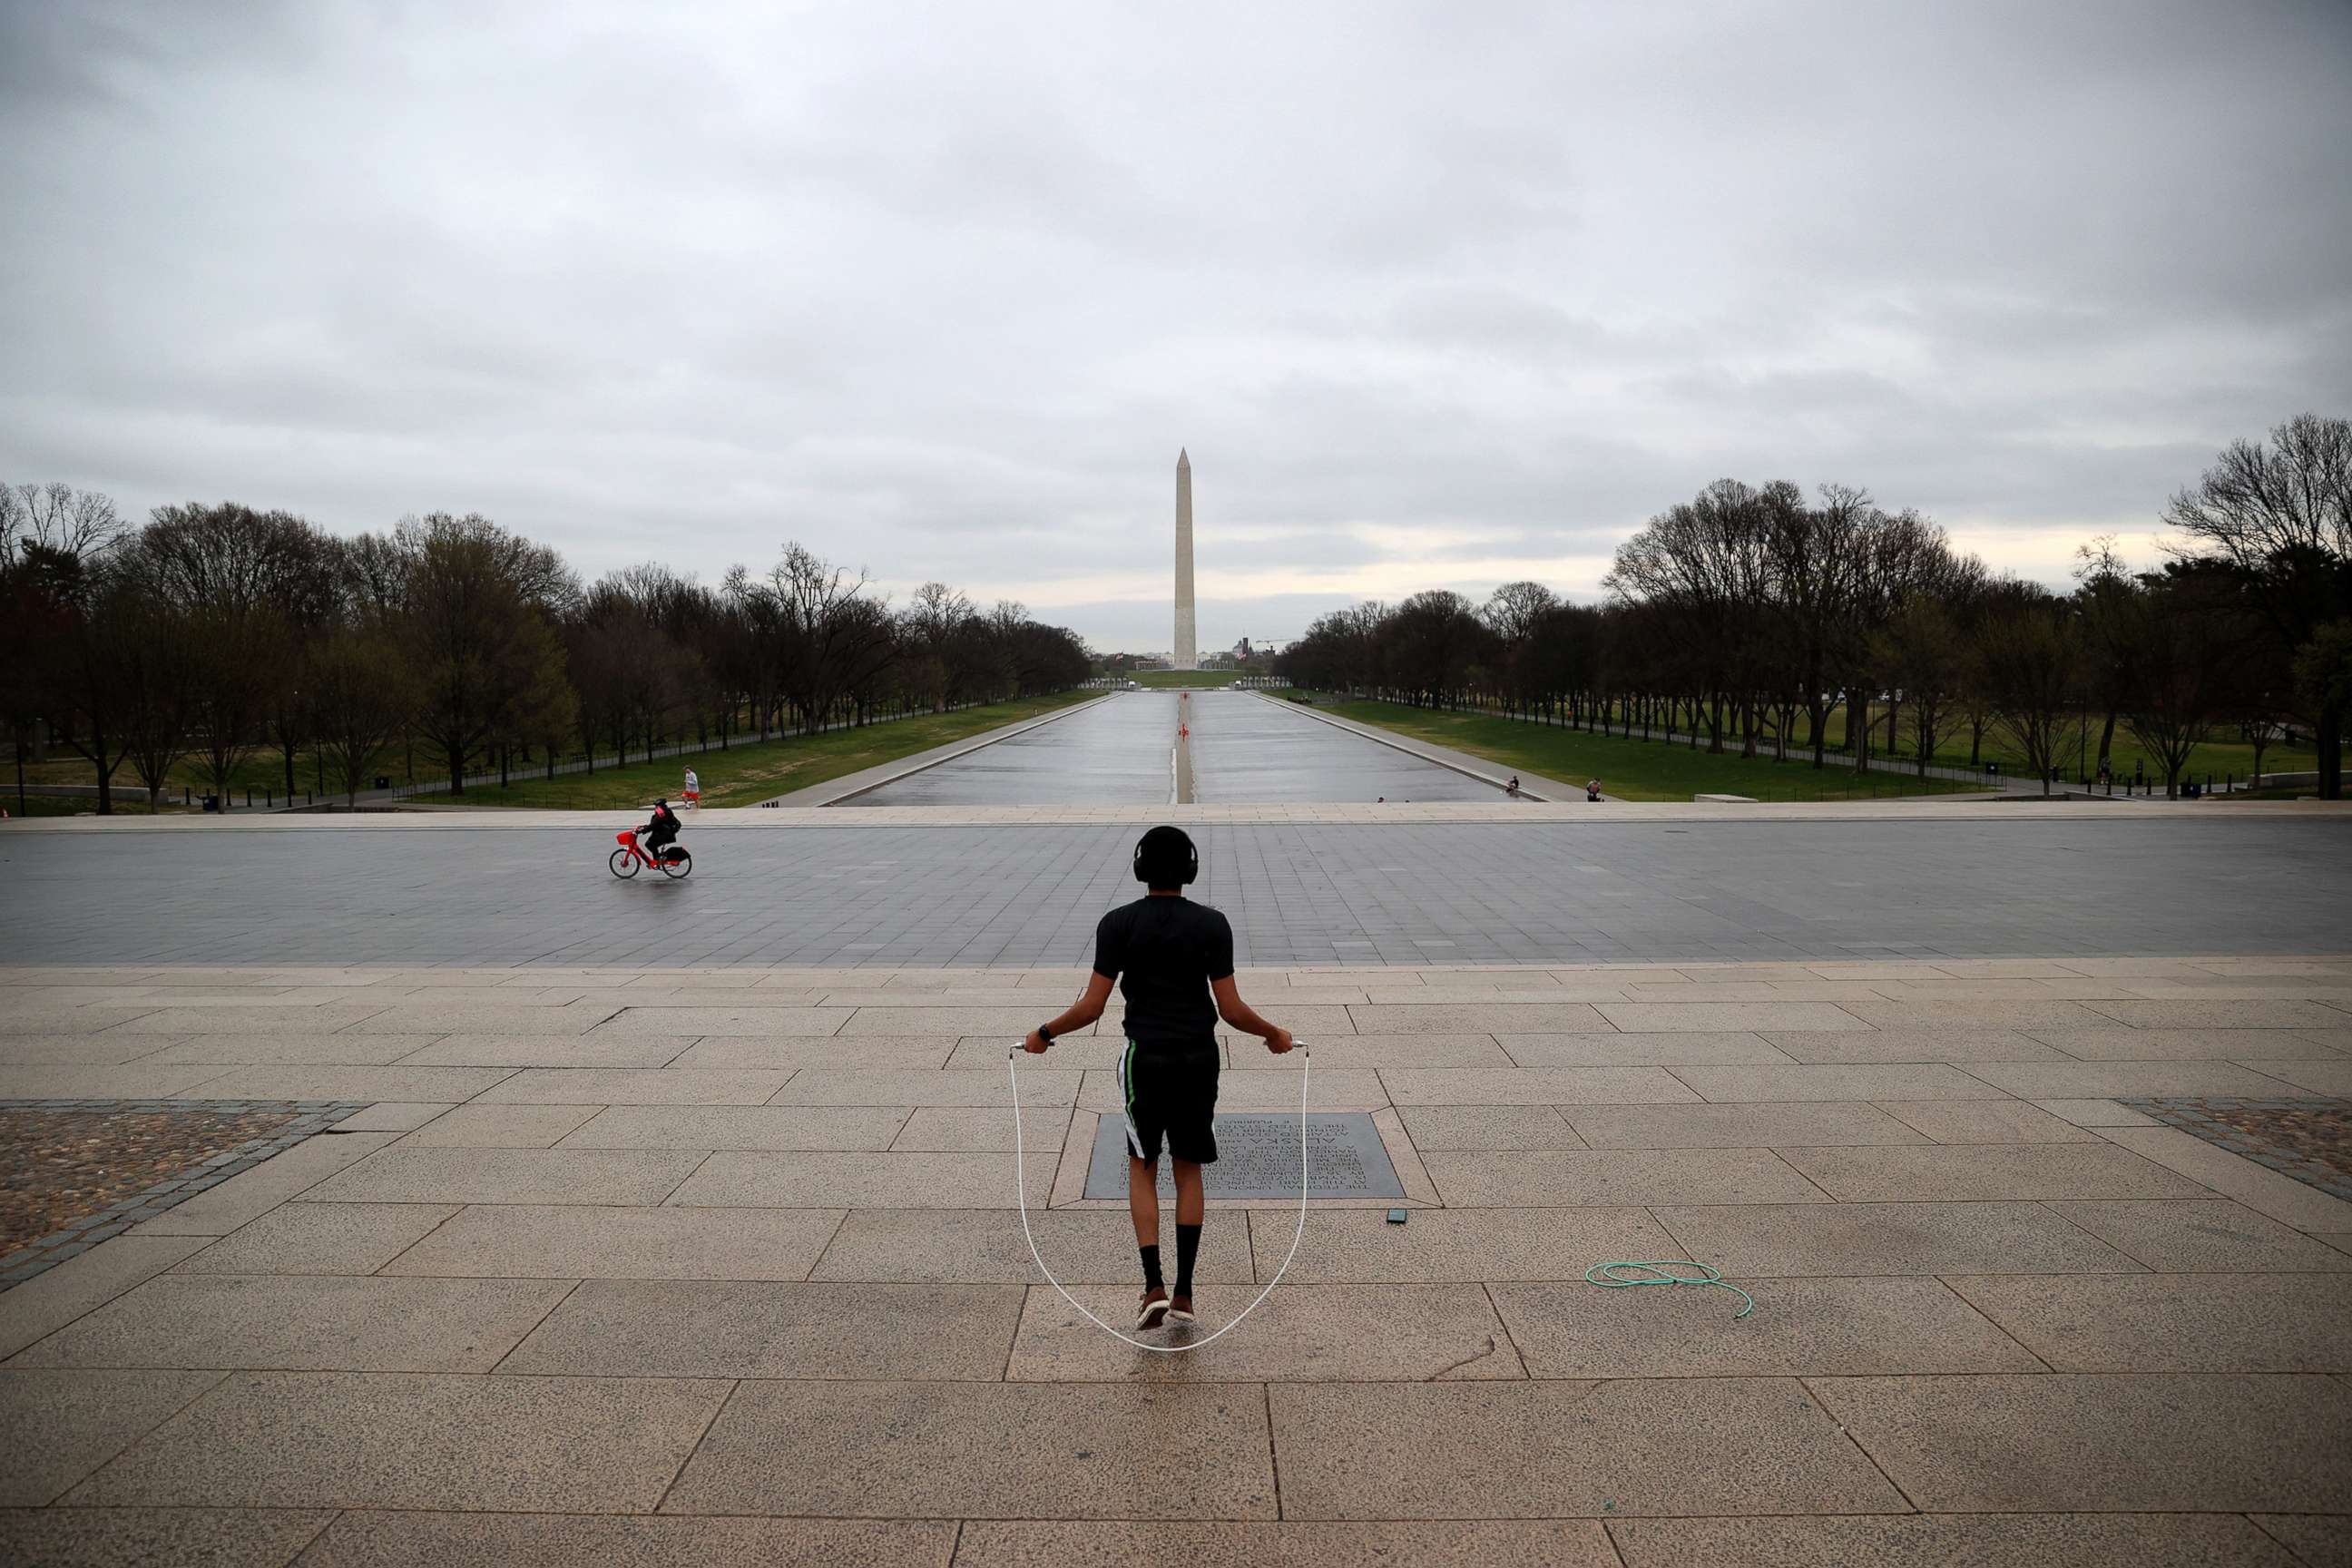 PHOTO: Zef Talahun jumps rope on the plaza in front of the Lincoln Memorial, normally filled with tourists, but now nearly empty due to the impacts of coronavirus (COVID-19) on March 17, 2020 in Washington, D.C.